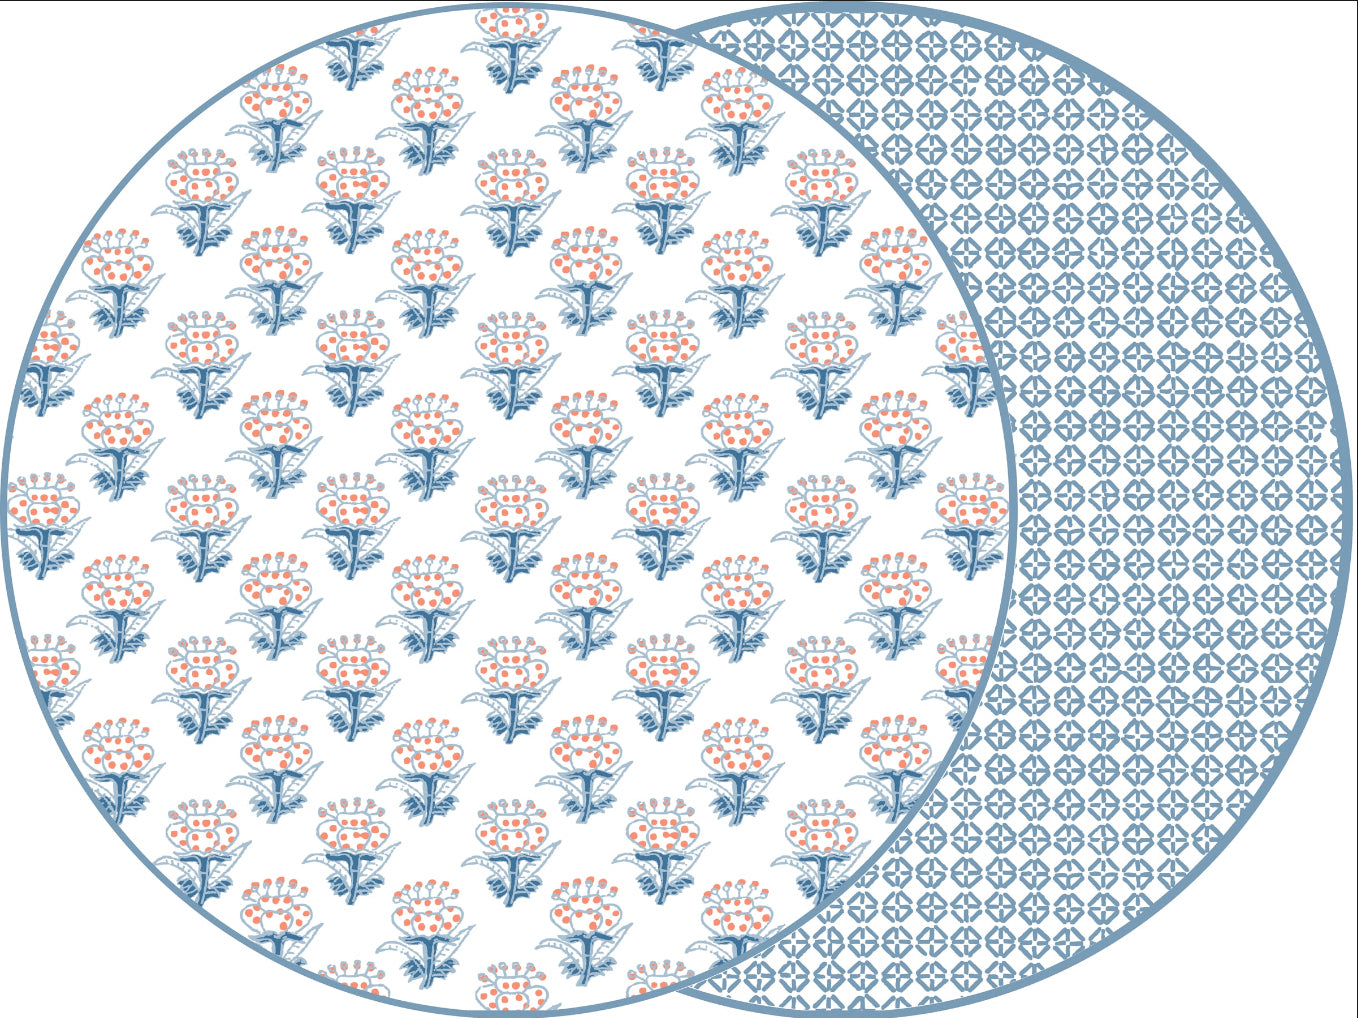 ROUND TWO SIDED PETITE FLEUR  AND JAIPUR PLACEMAT ~ BLUE/ORANGE